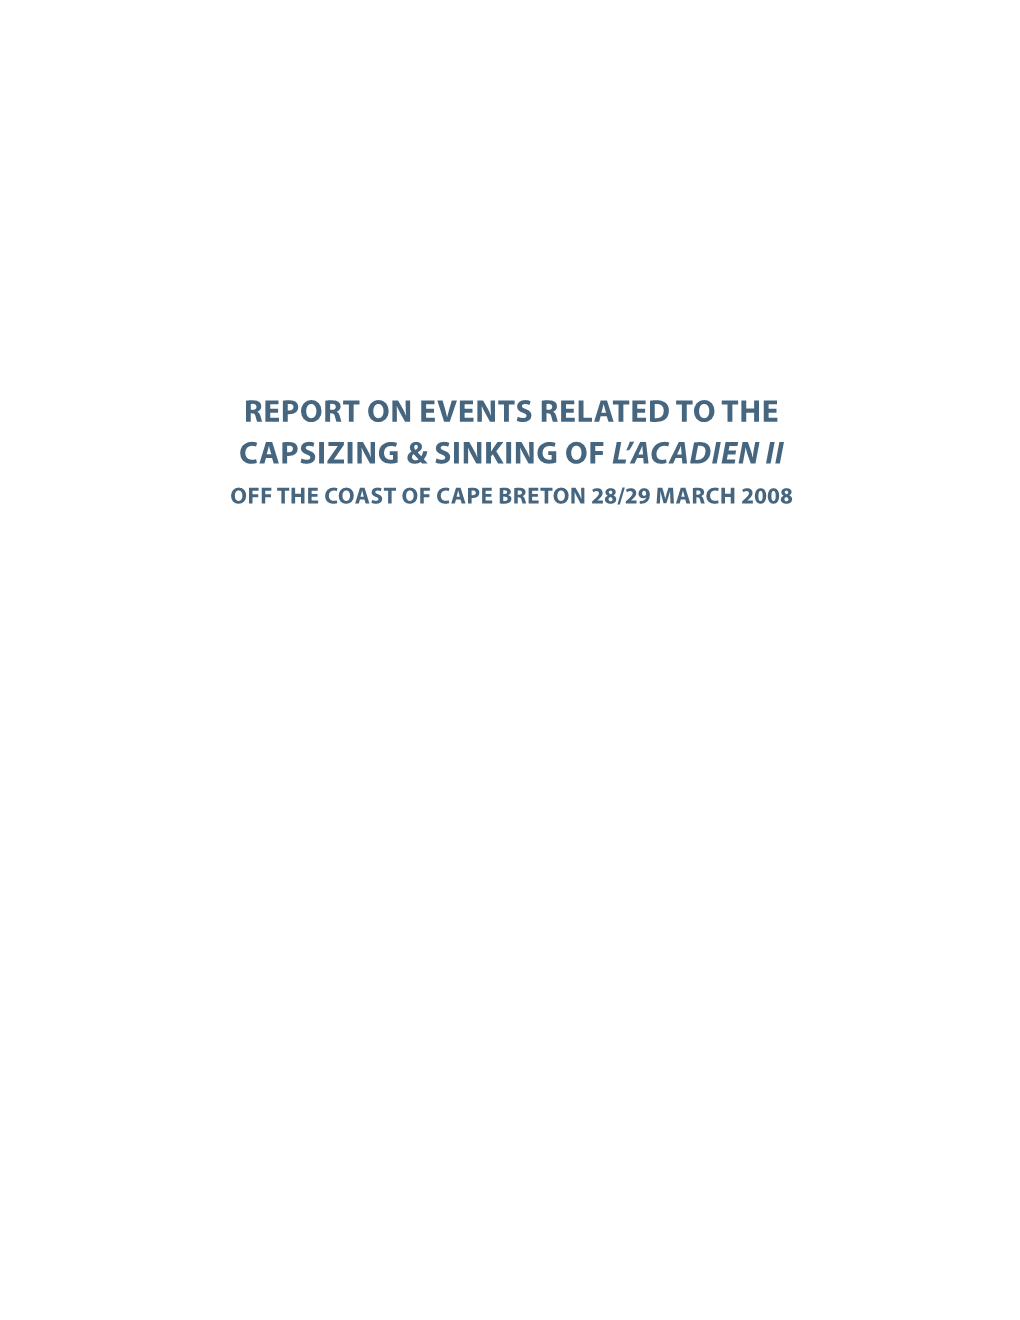 Report on Events Related to the Capsizing & Sinking of L'acadien Ii